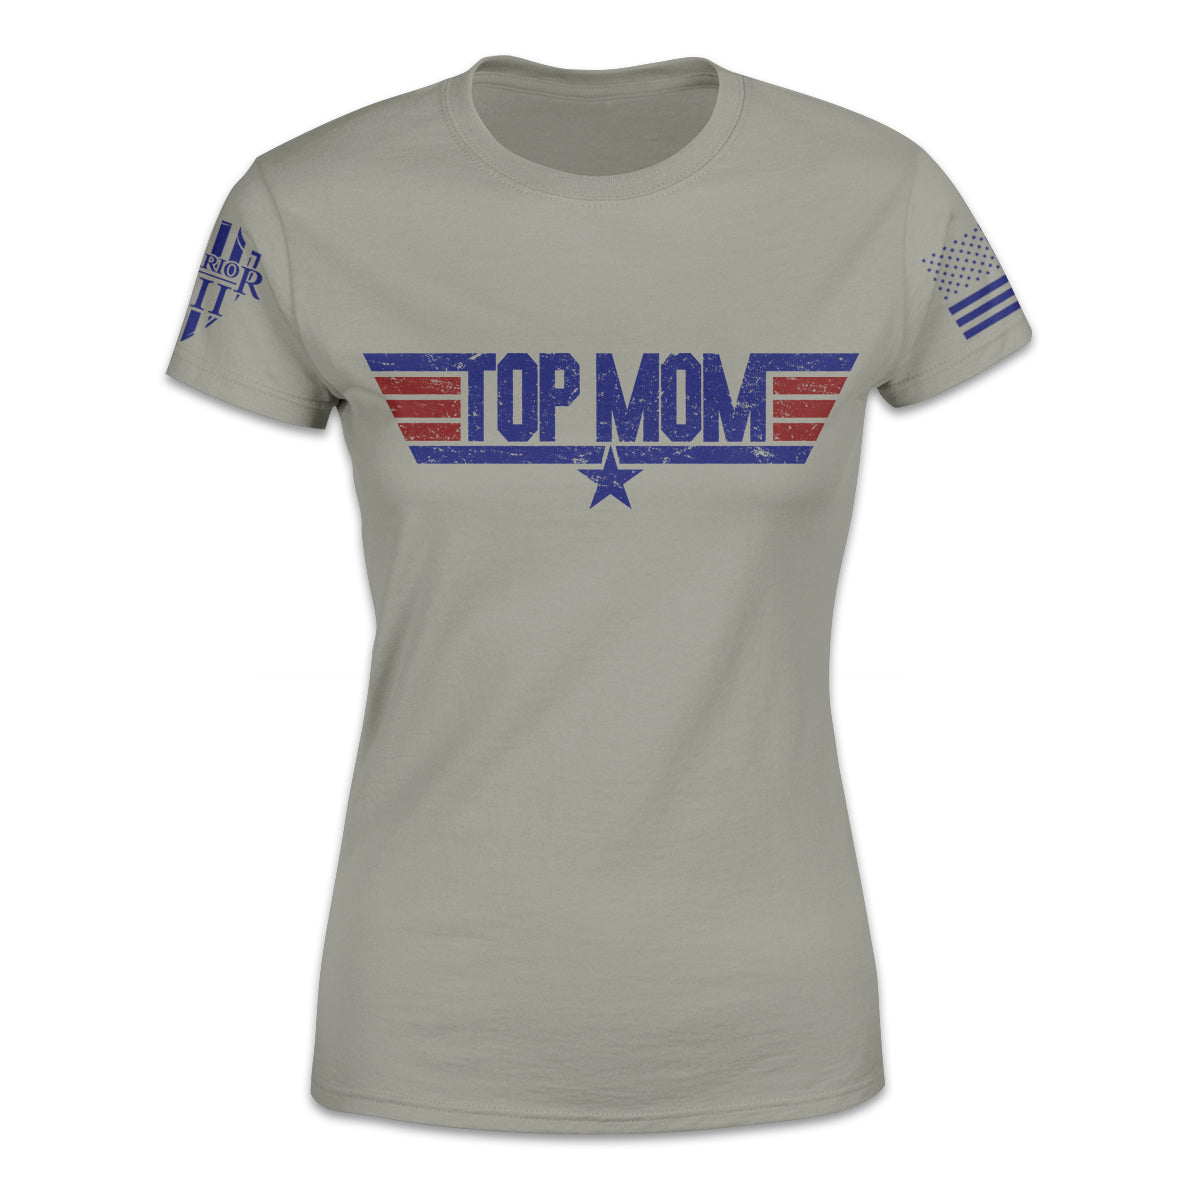 A light grey women's relaxed fit'shirt with the words "top dad" printed on the front.